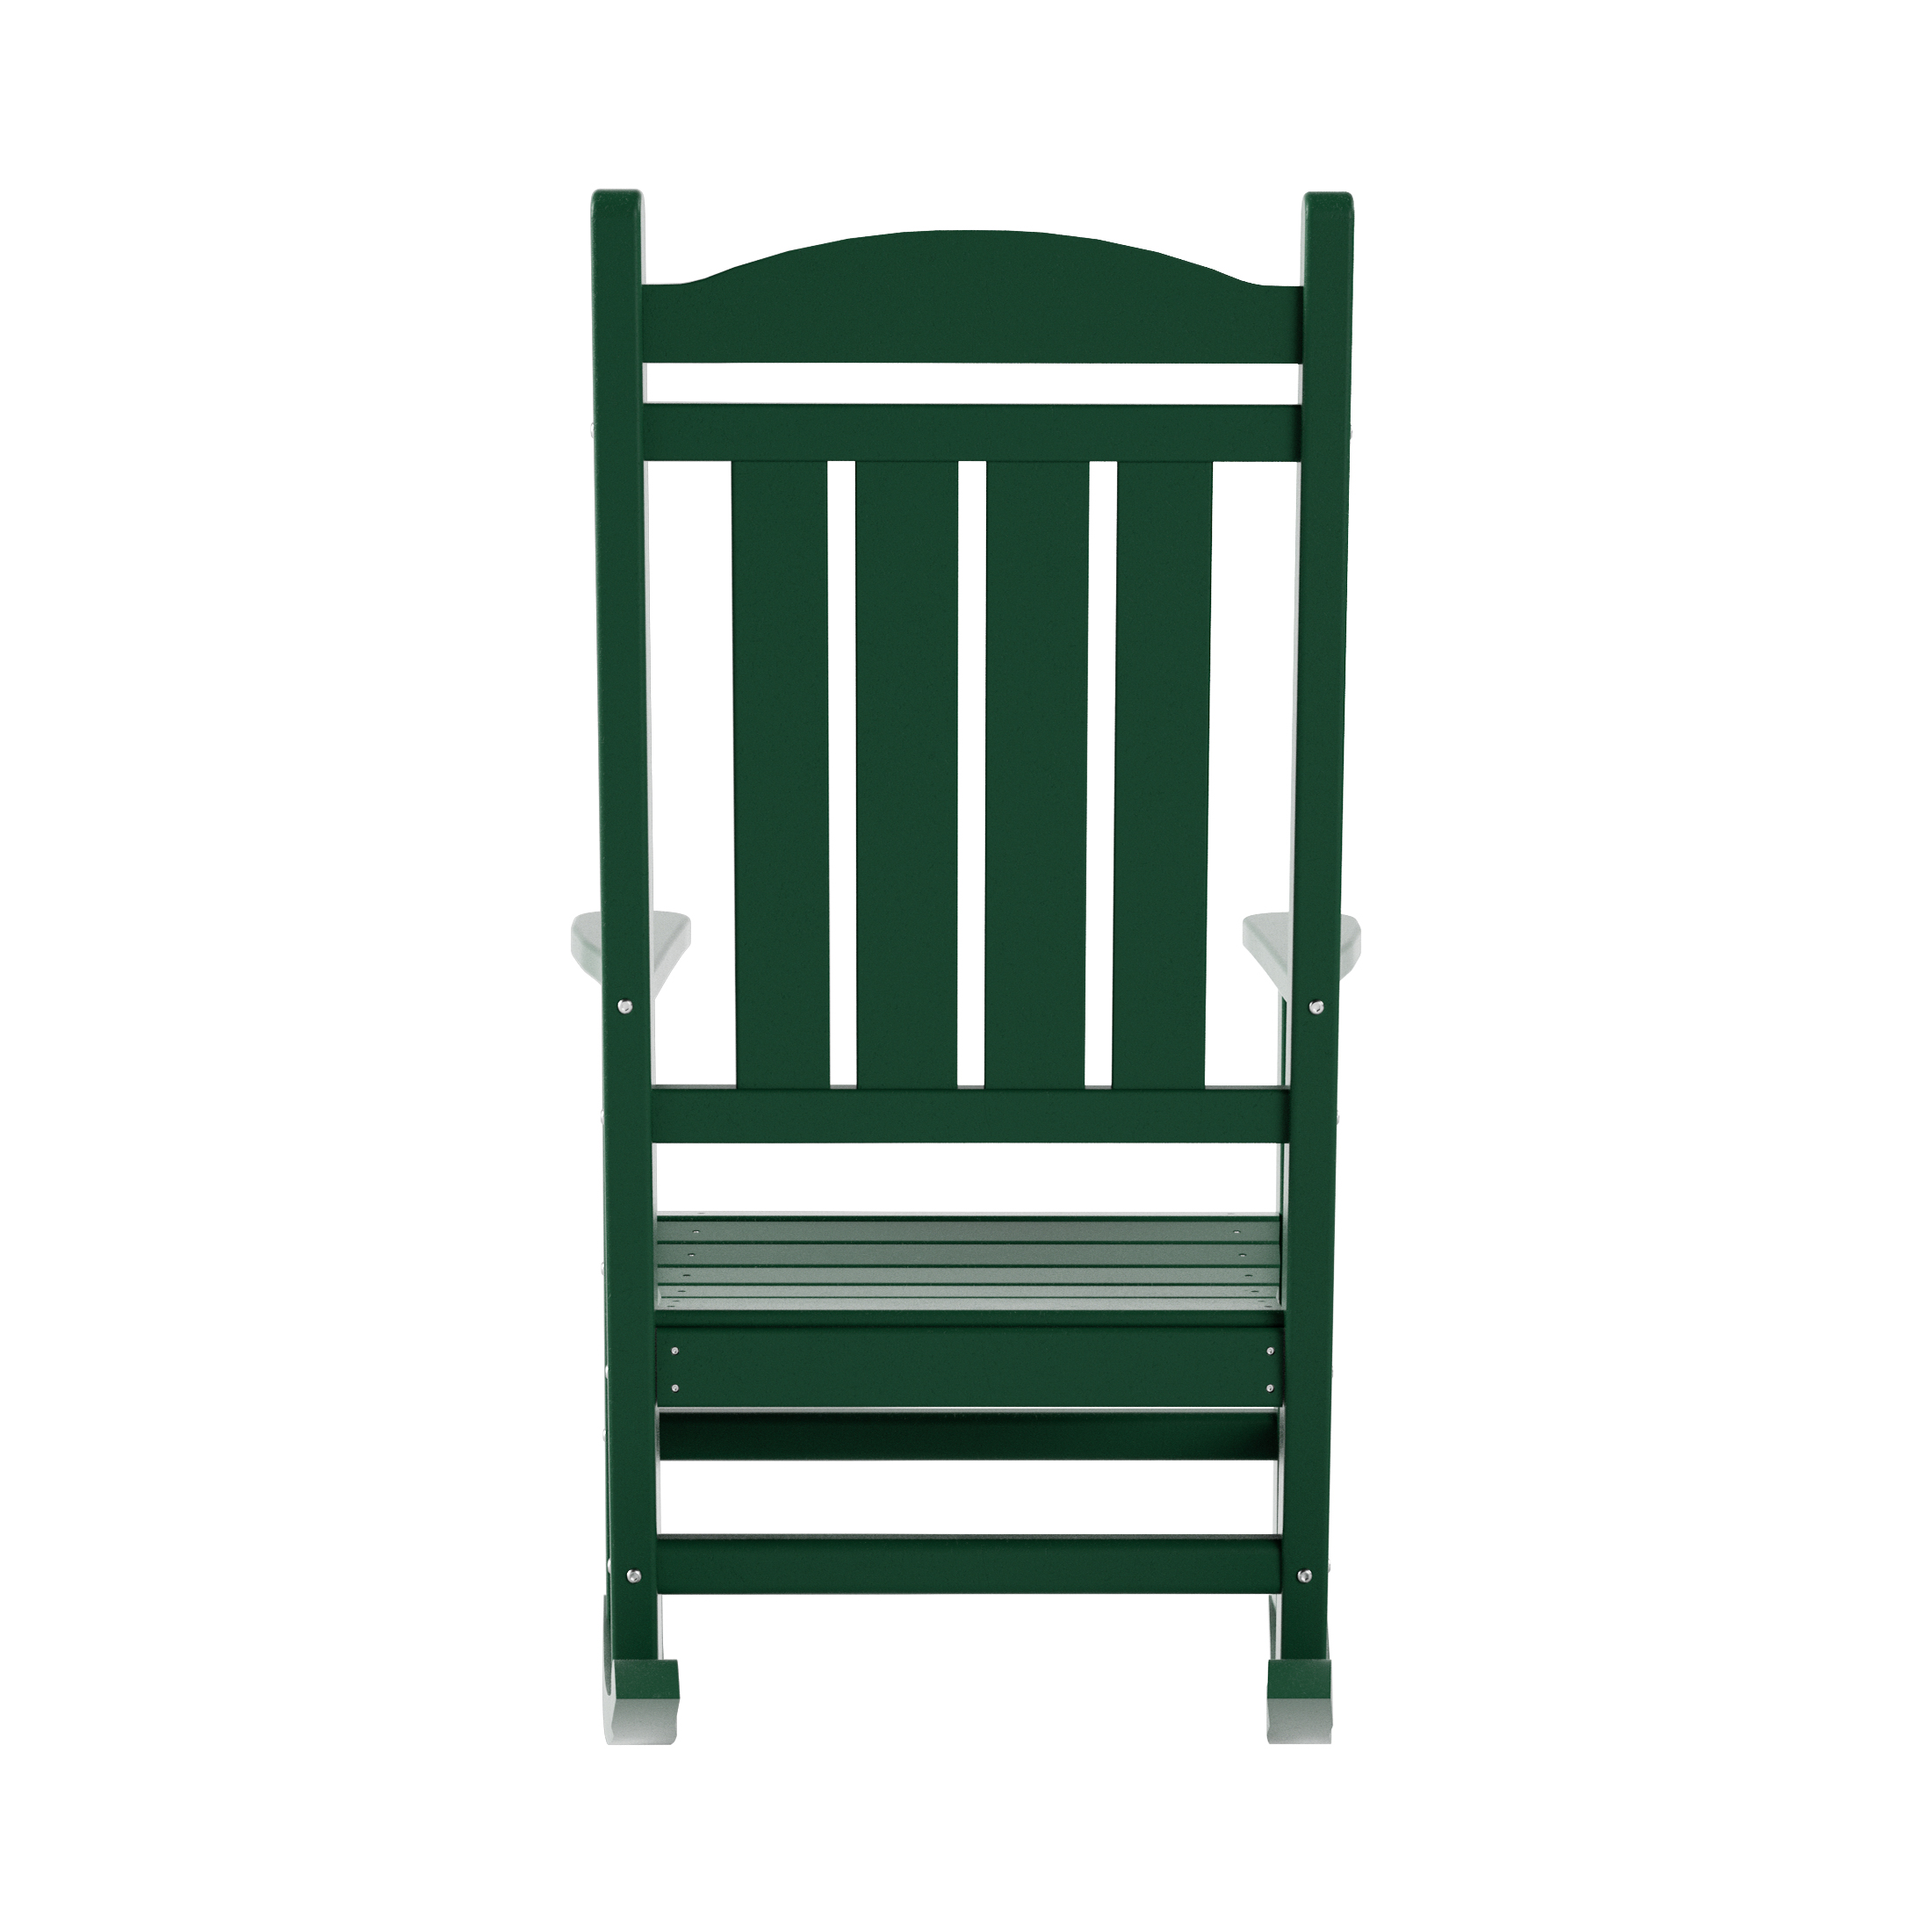 Costaelm Paradise Classic Plastic Outdoor Porch Rocking Chairs (Set of 4), Dark Green - image 5 of 8